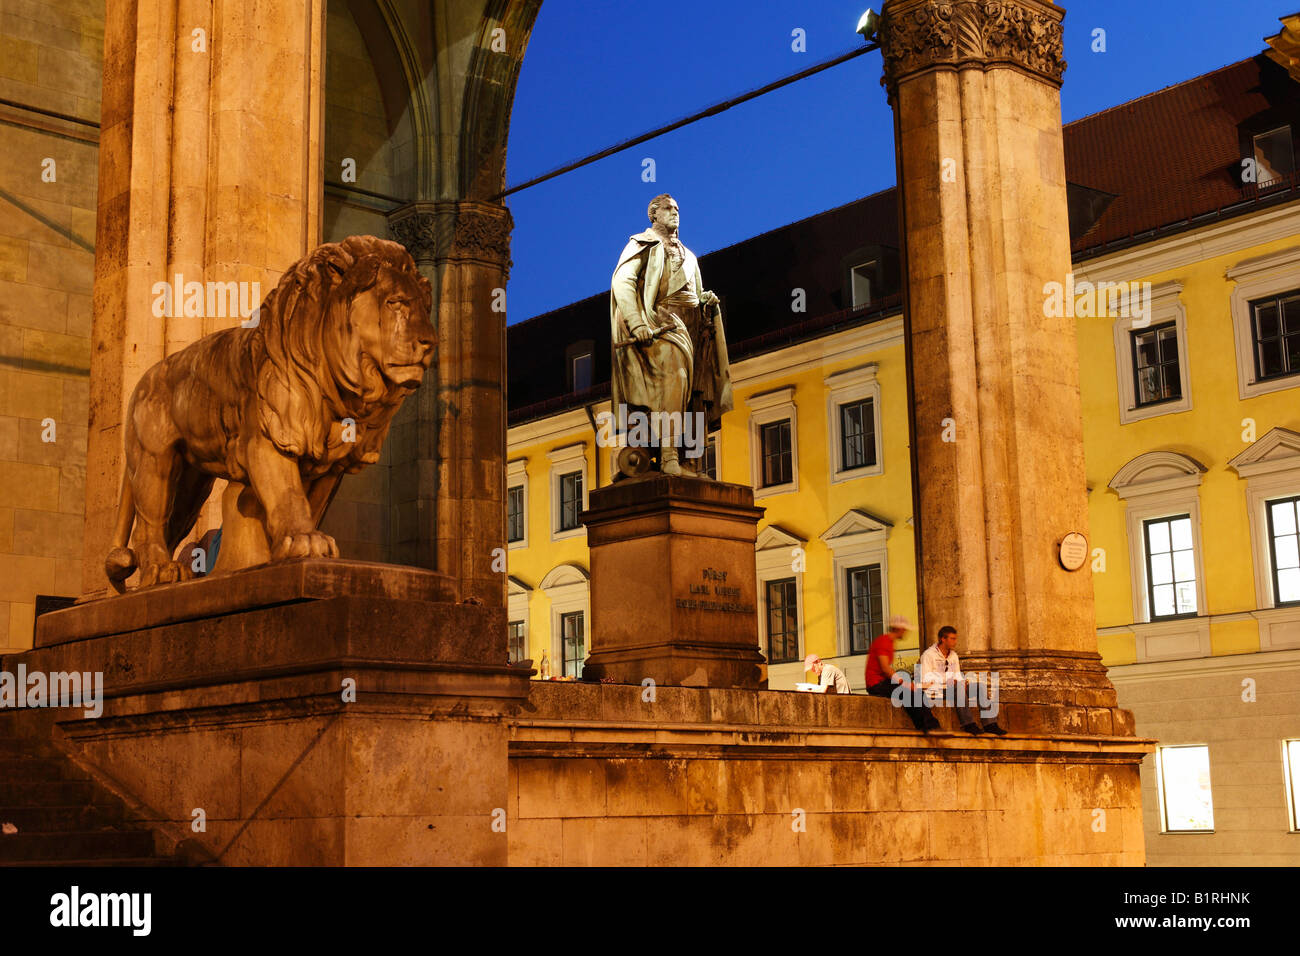 Feldherrnhalle, Field Marshall's Hall, statue of Prince Carl Wrede, historic city centre, Munich, Bavaria, Germany, Europe Stock Photo